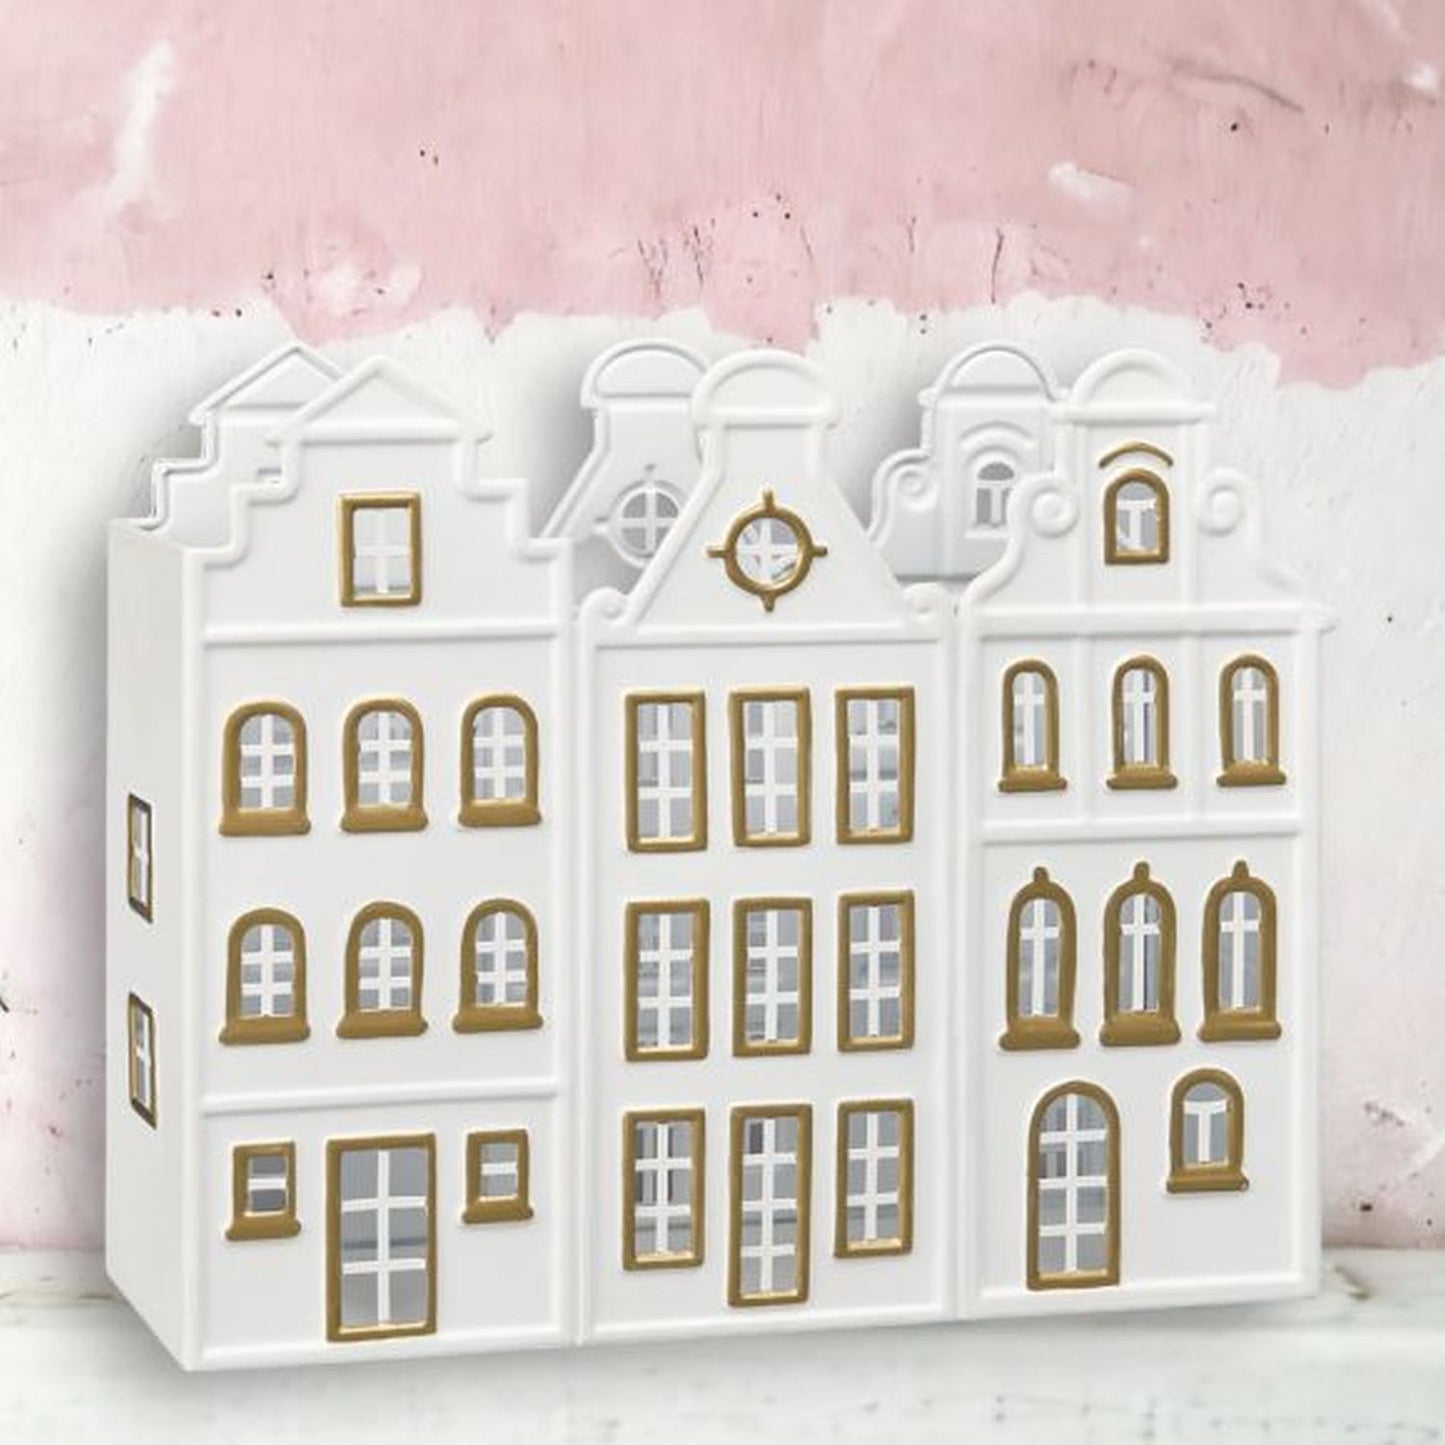 December Diamonds Gingerbread Village 12-Inch Metal Led 3 Townhomes